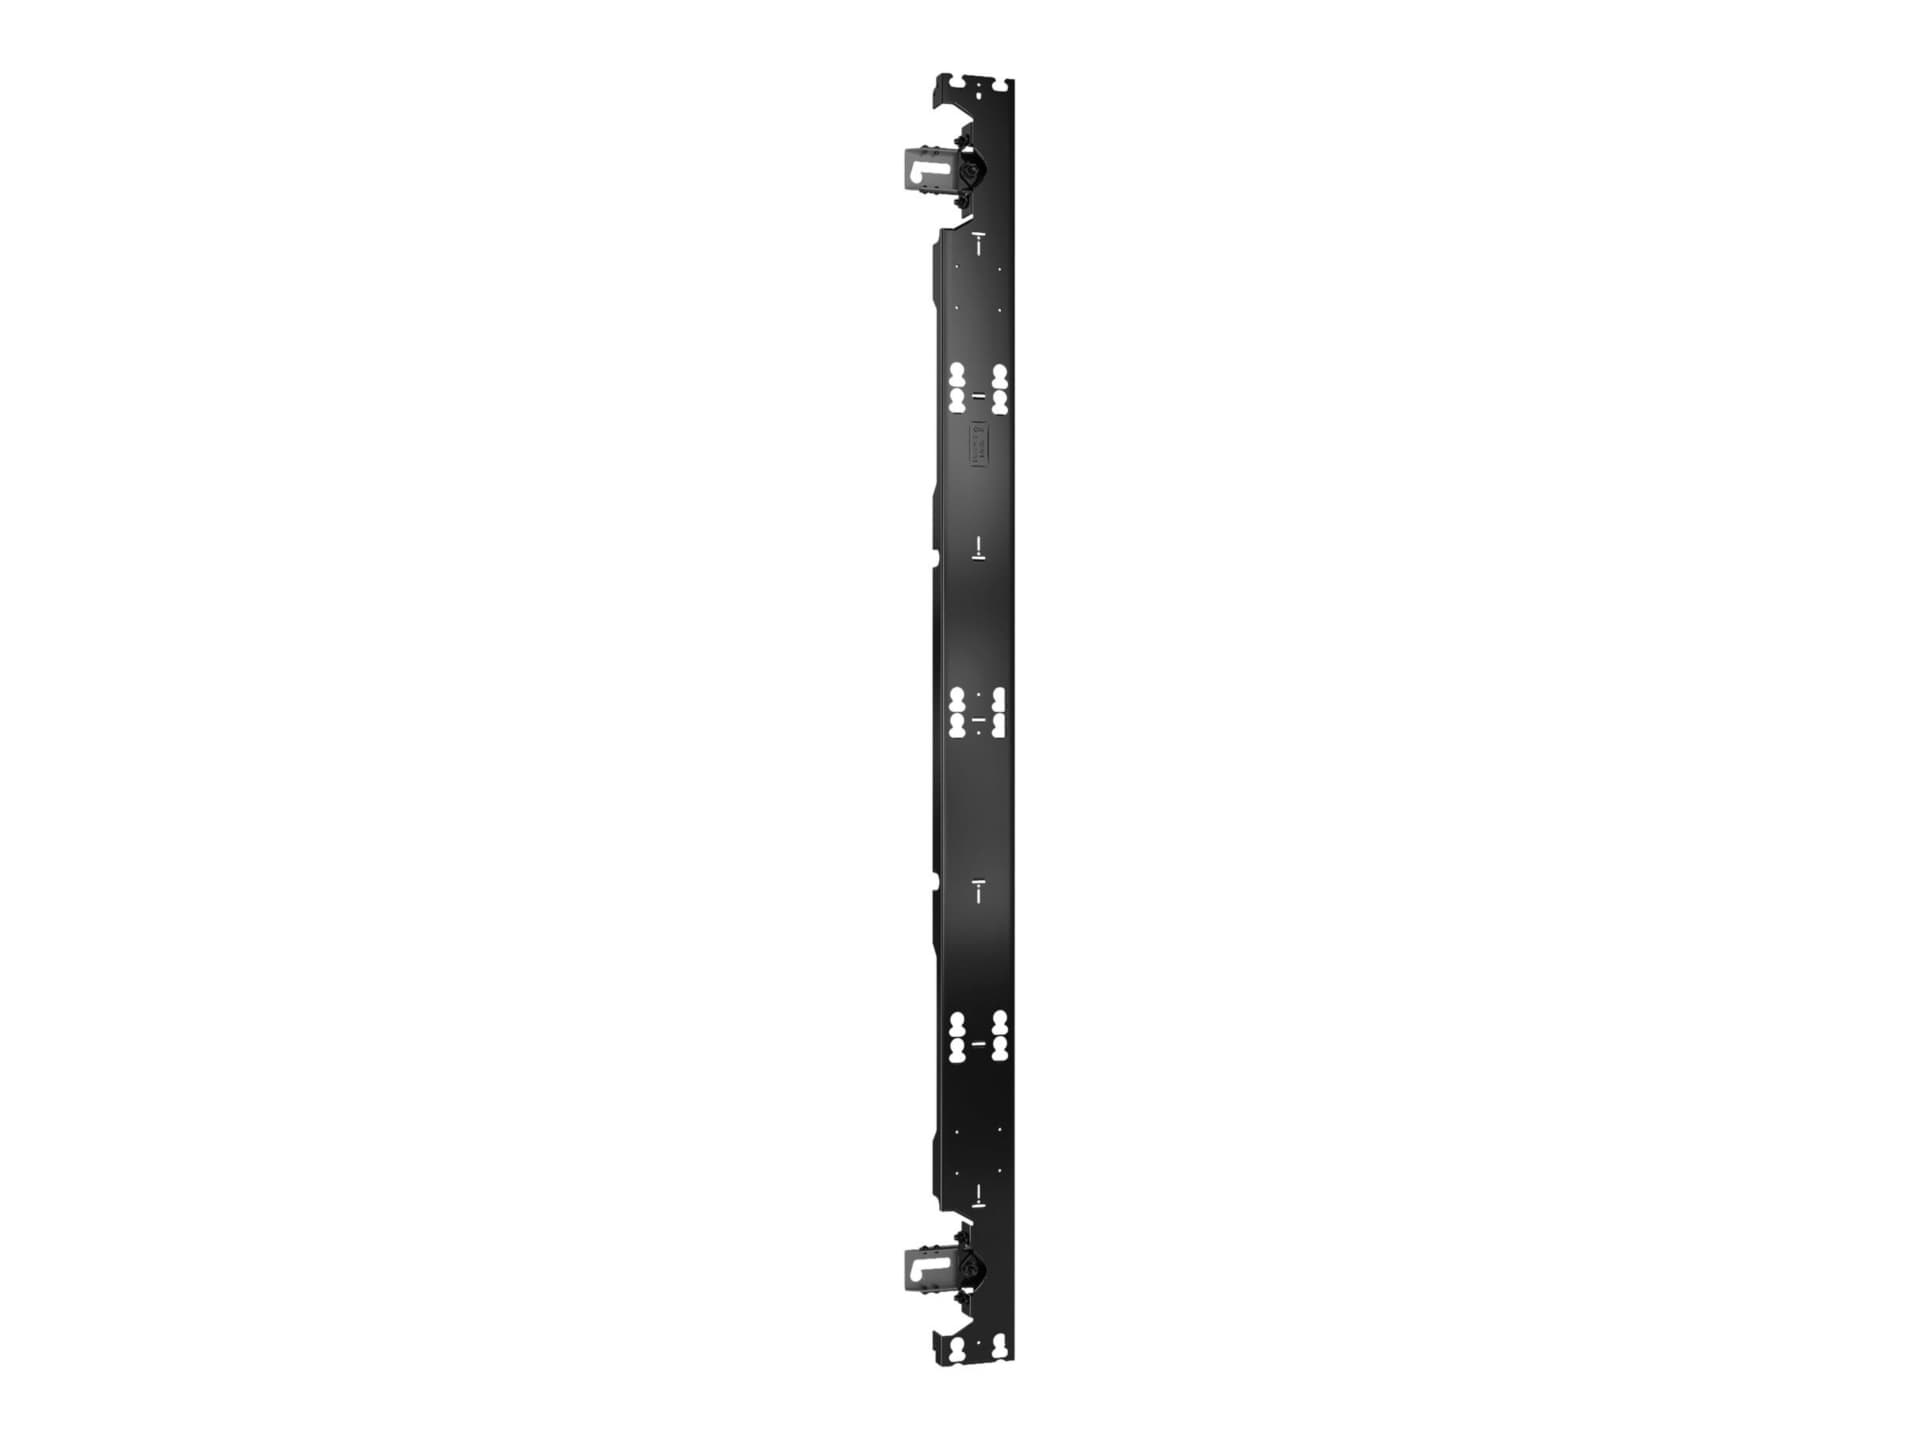 Chief TiLED Middle dvLED Wall Mount - For 4 Tall LG LSCB Series Ultra Slim